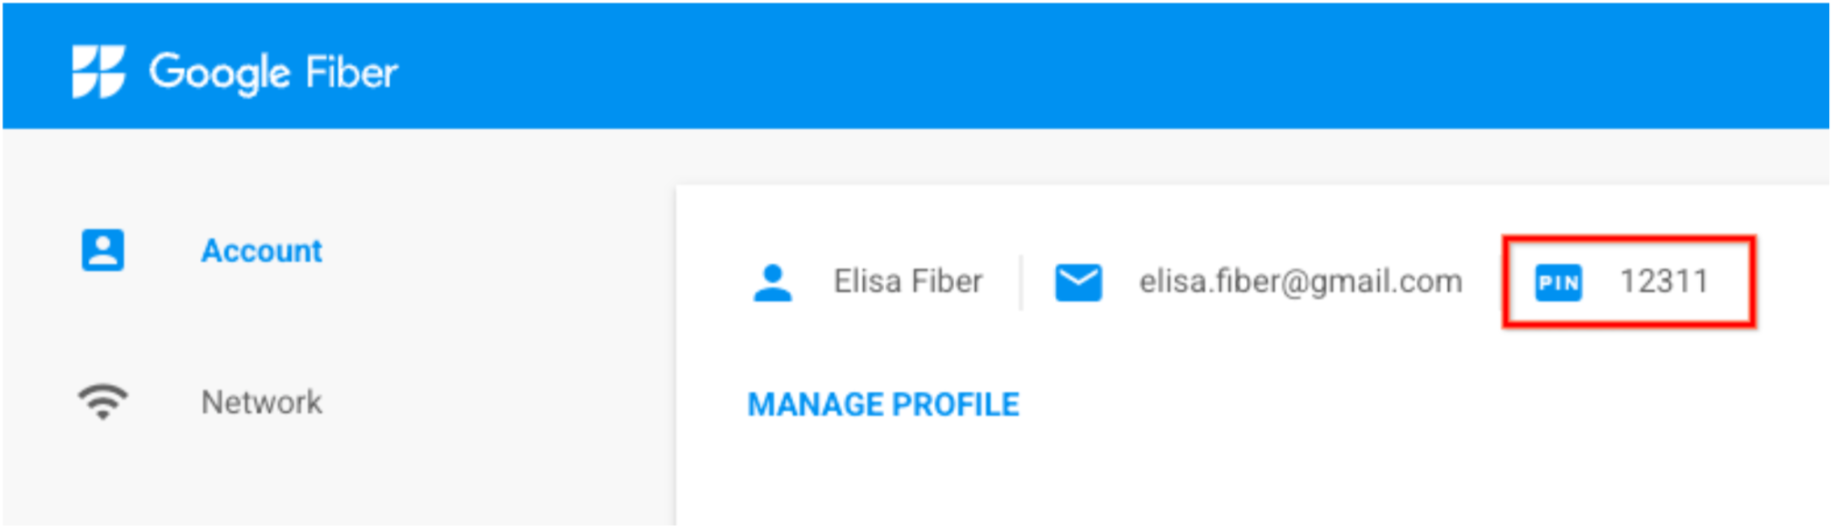 Google Fiber customer support PIN number found in account.